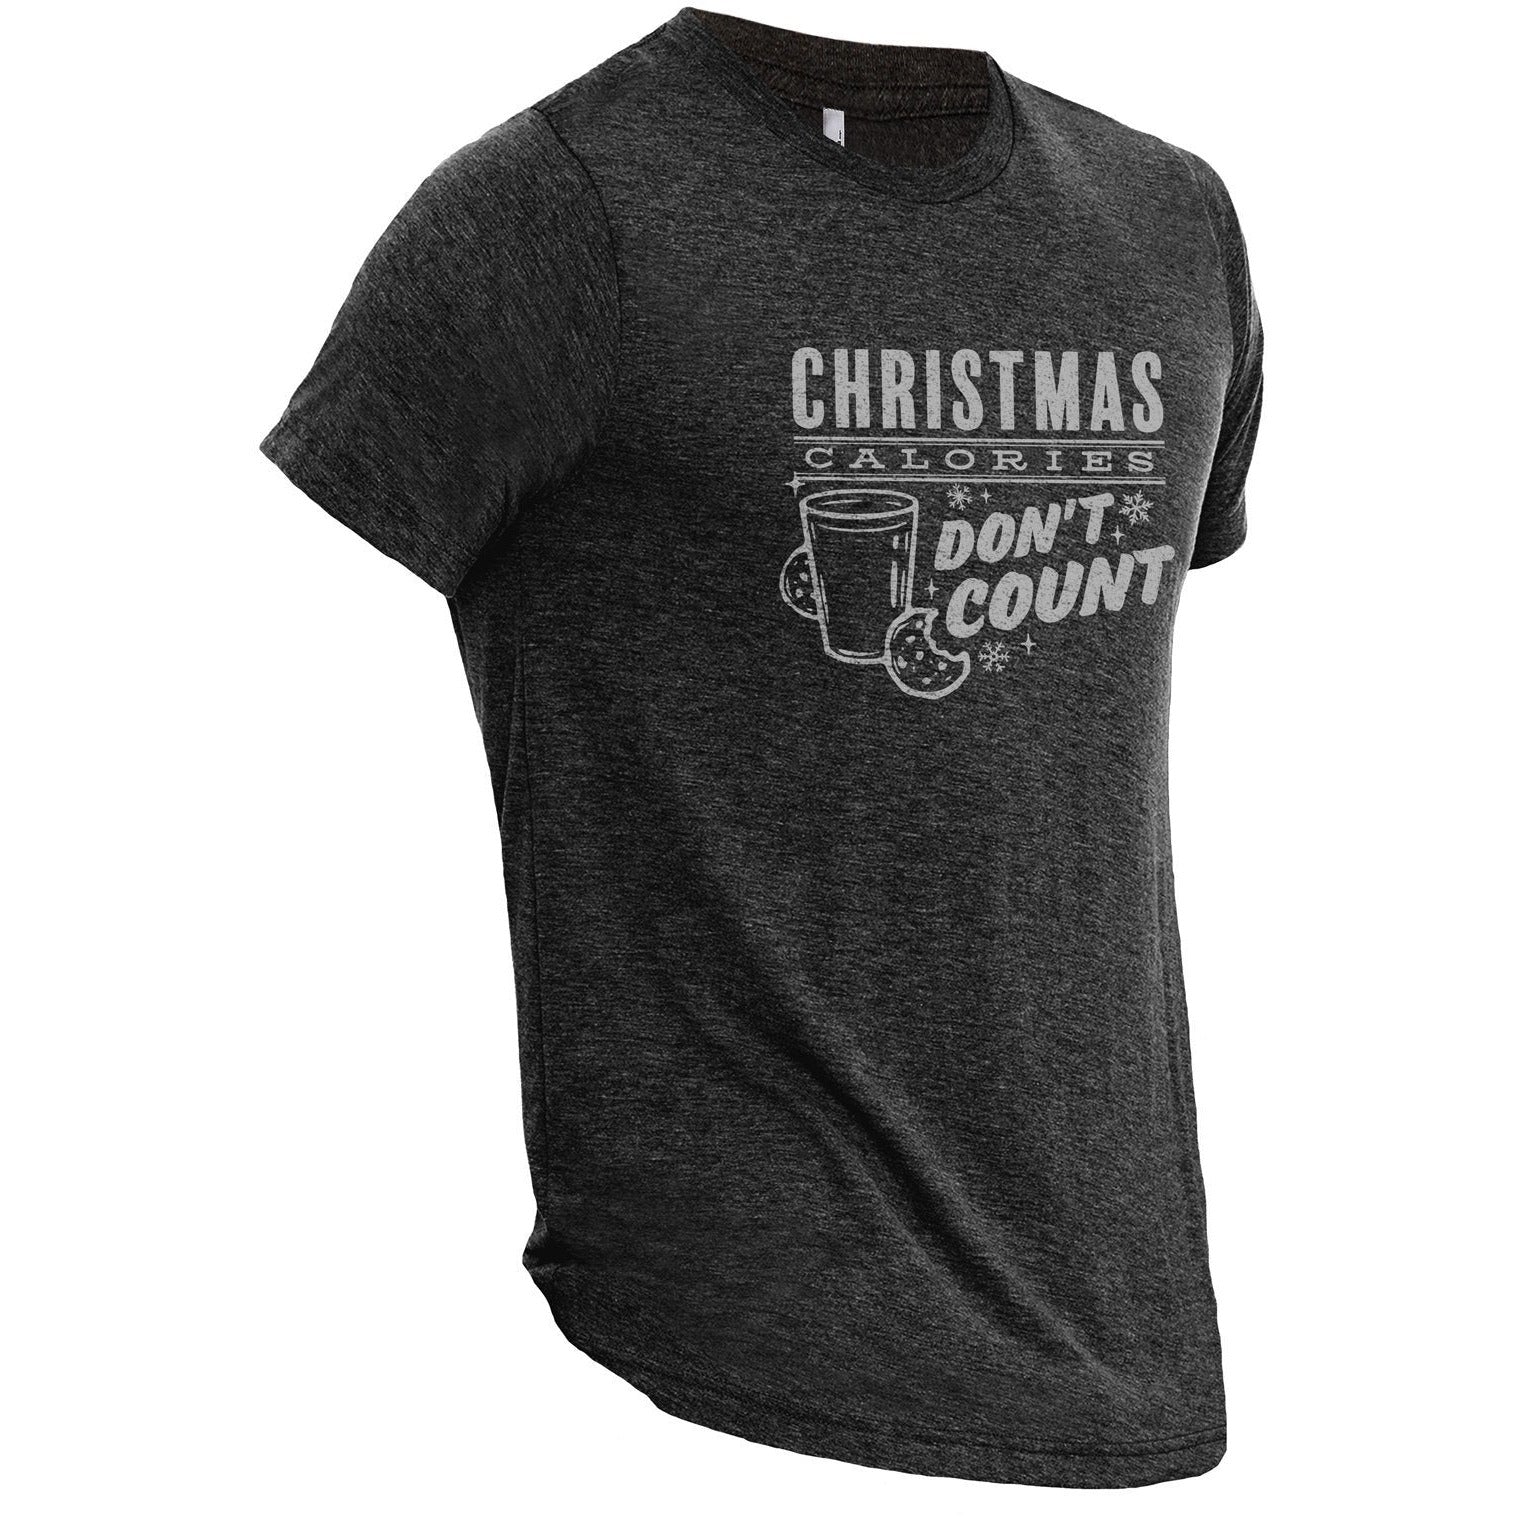 Christmas Calories Don't Count Charcoal Printed Graphic Men's Crew T-Shirt Tee Side View